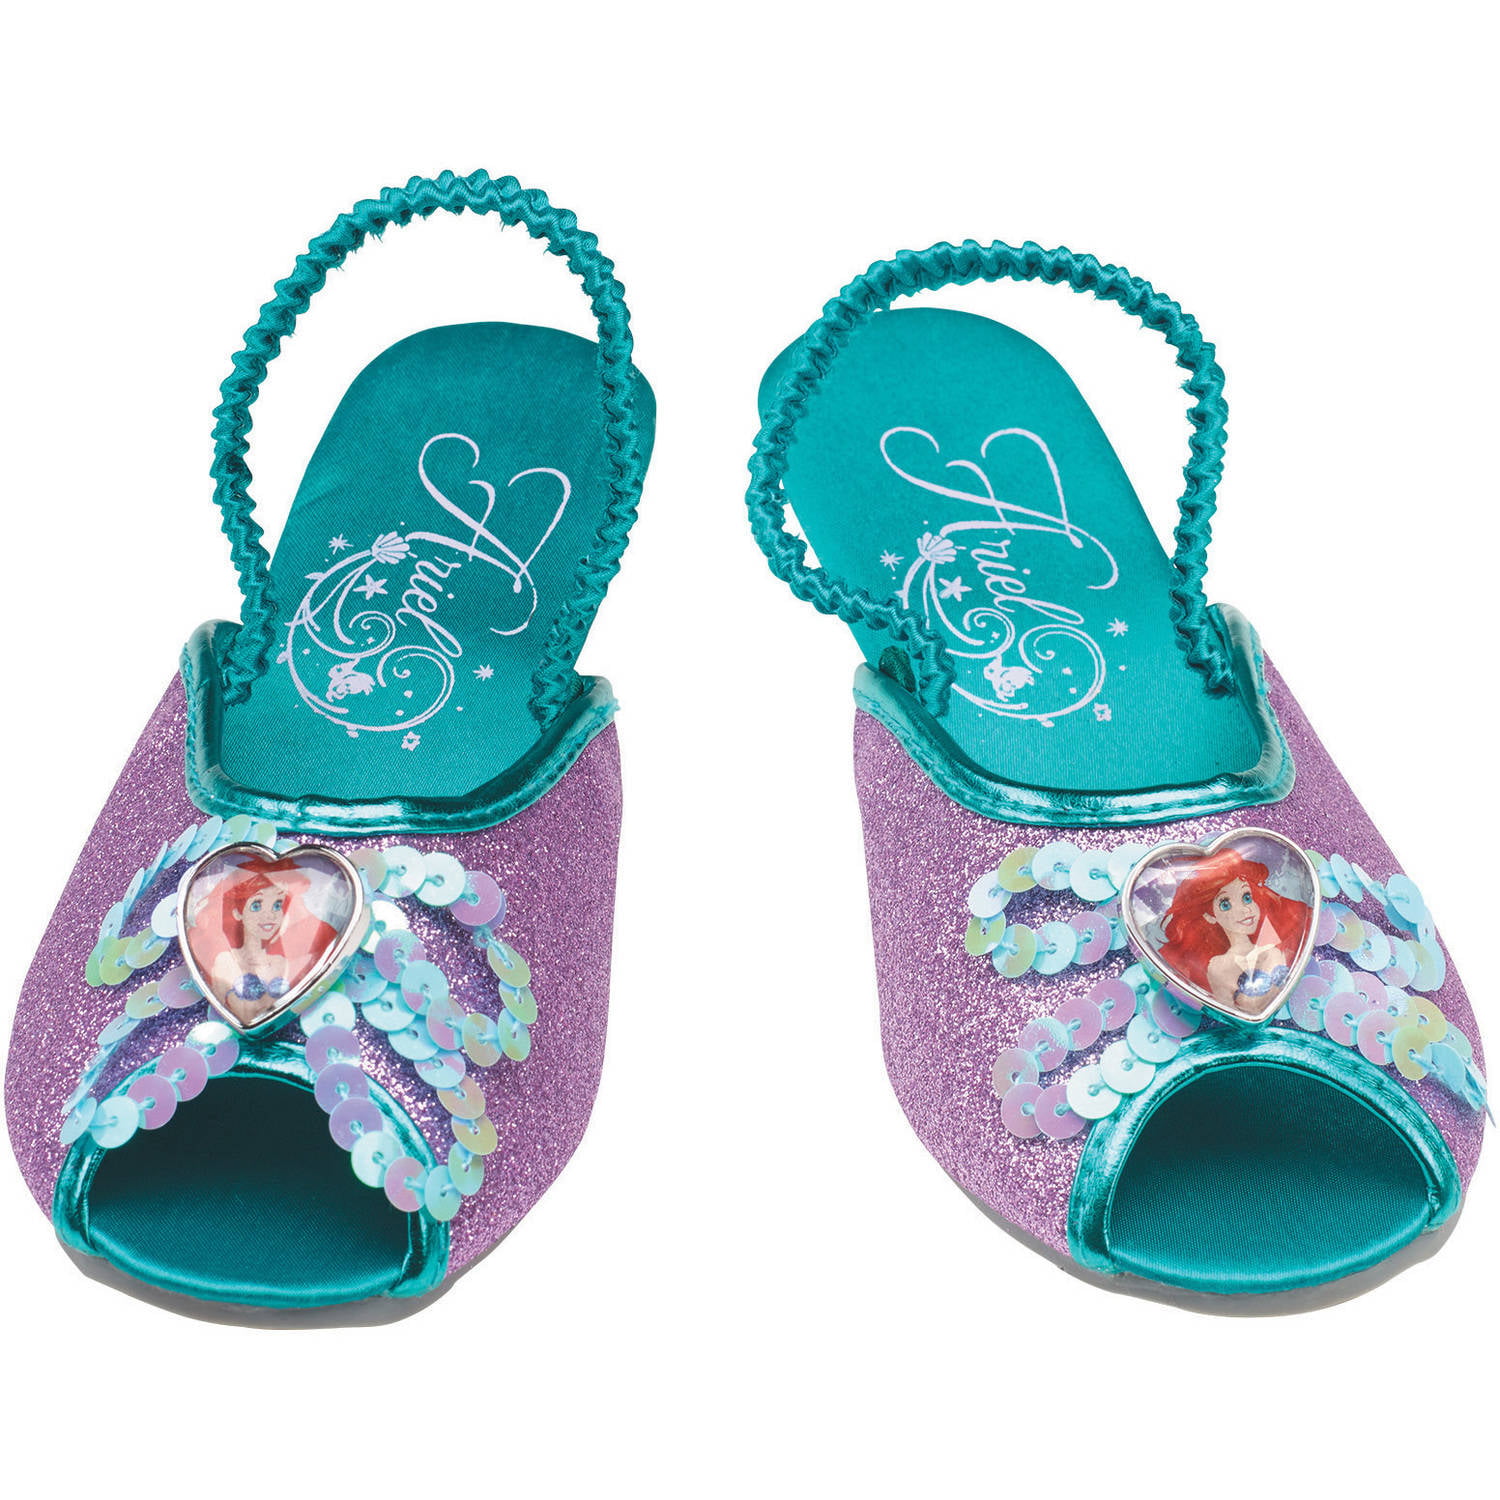 The Little Mermaid Ariel Child Shoes Halloween Costume Accessory ...